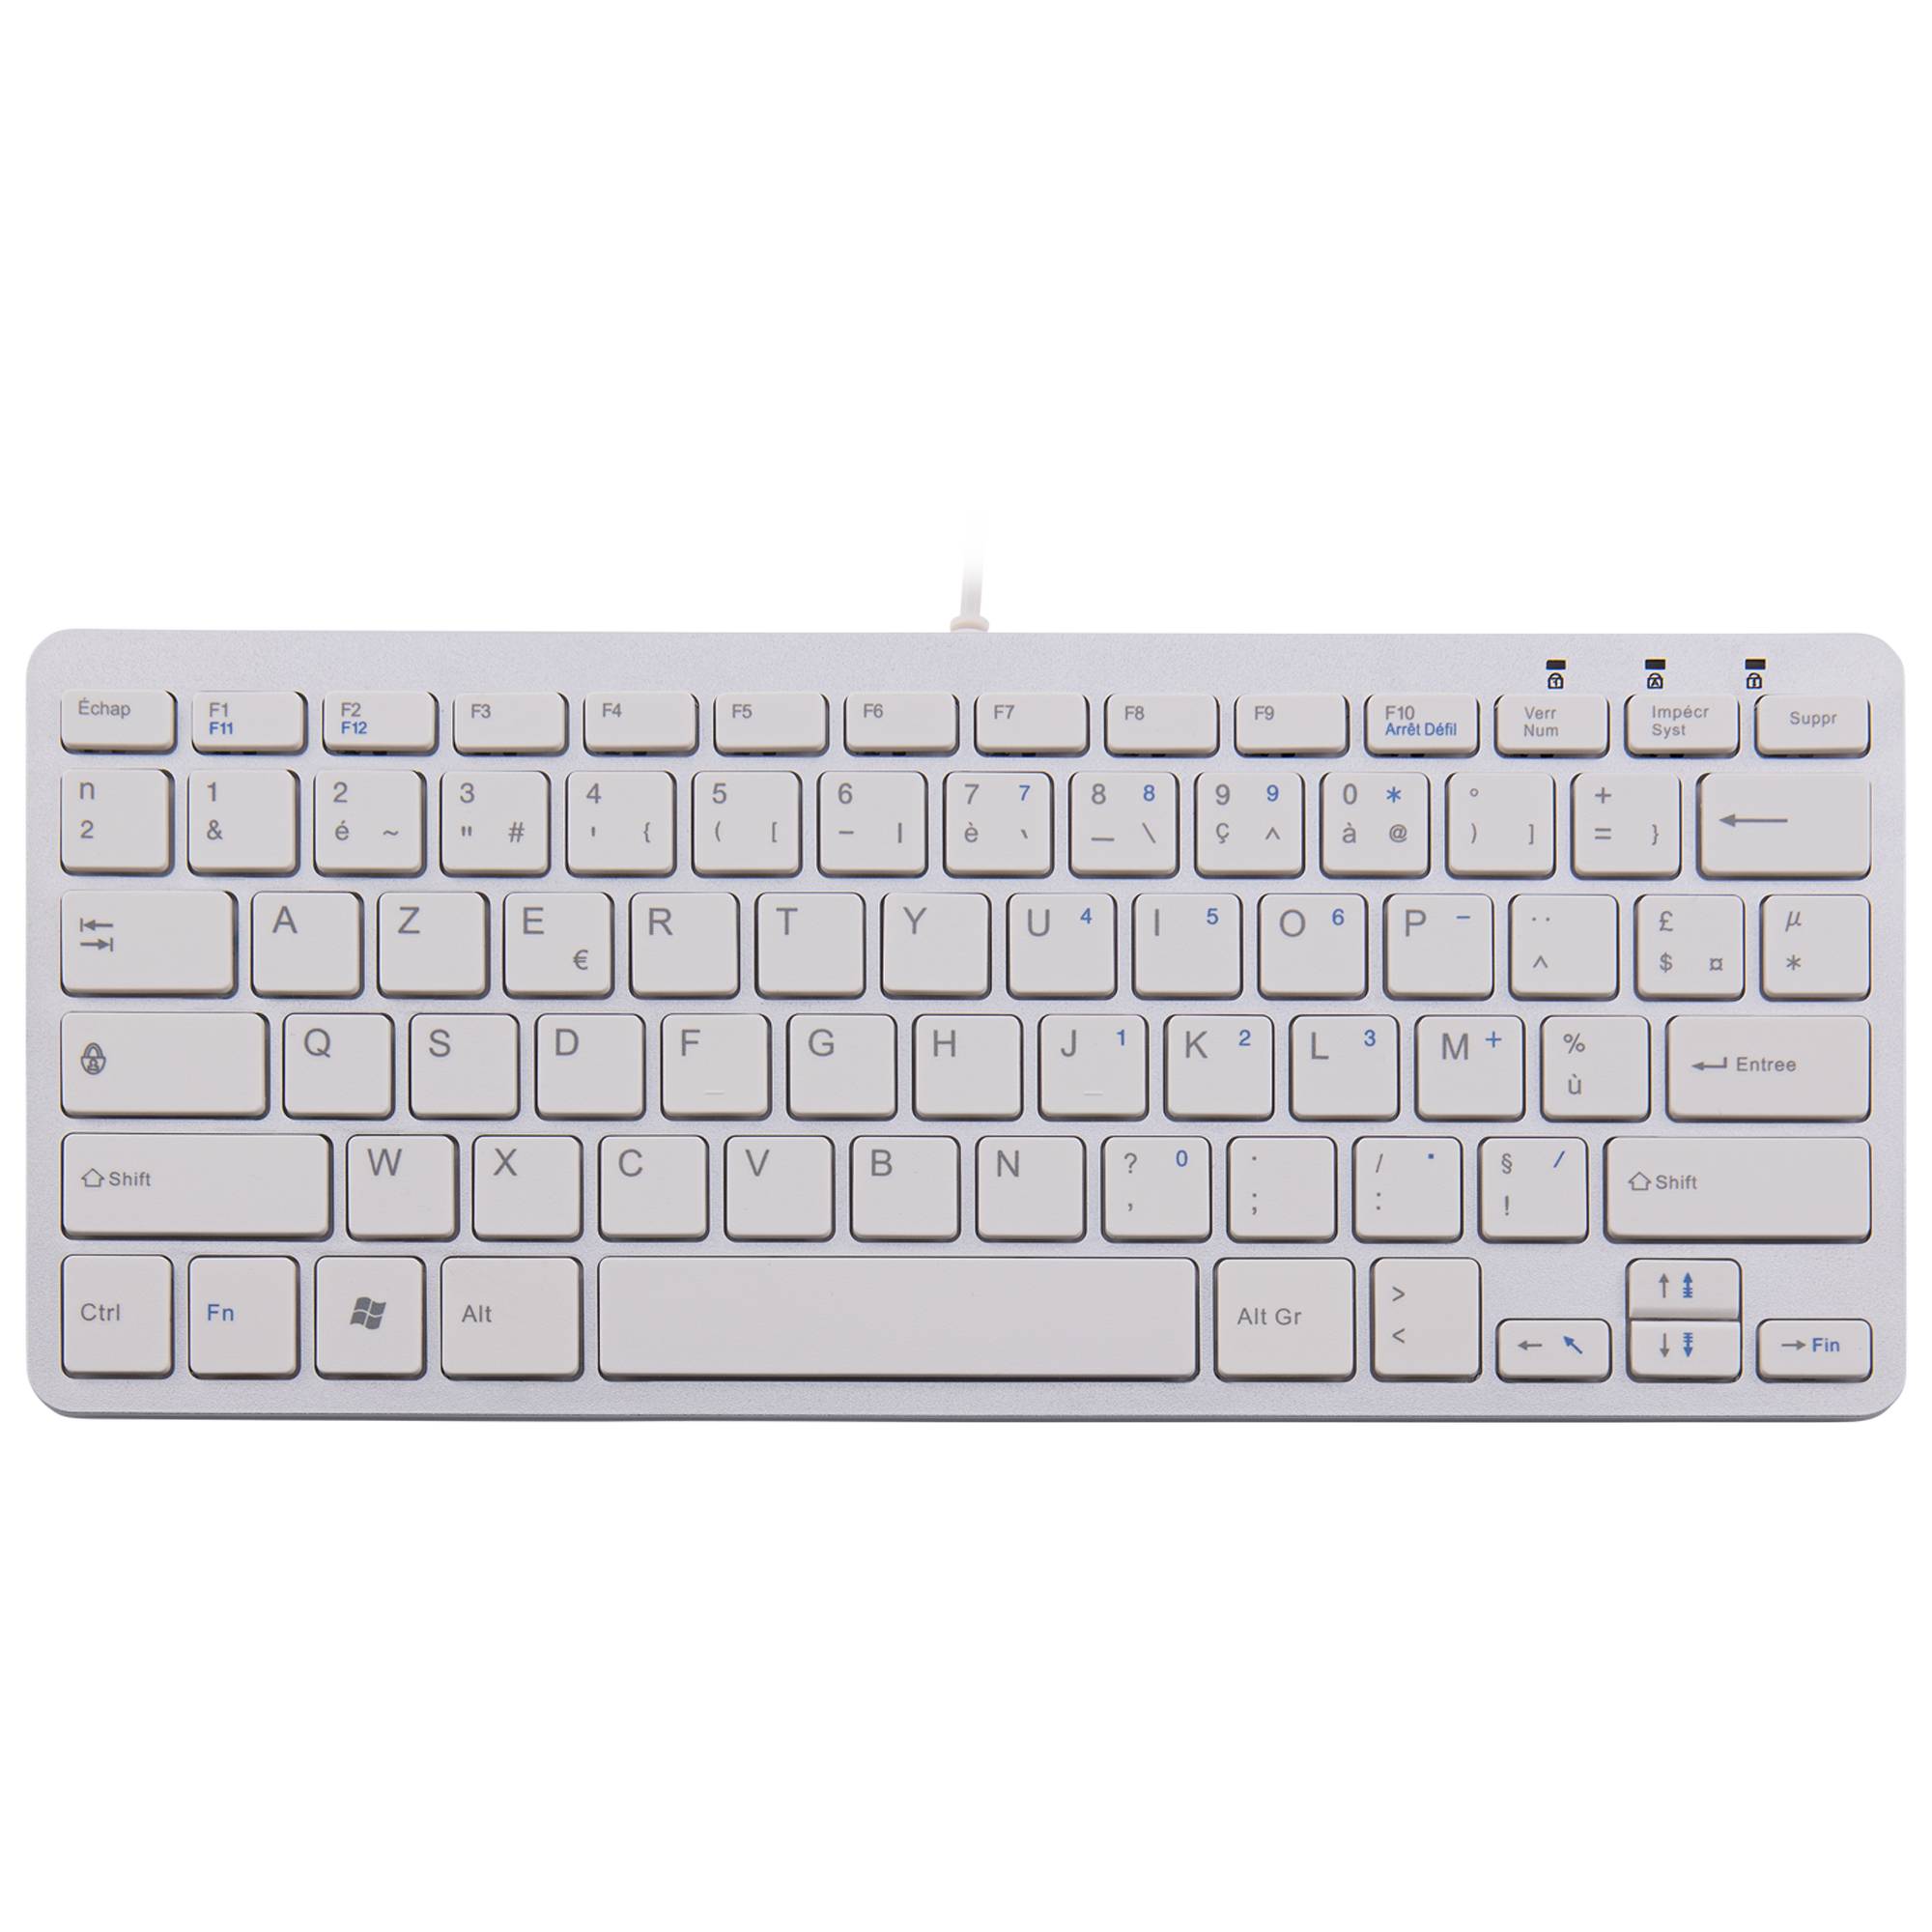 Rca Informatique - Image du produit : R-GO COMPACT KEYBOARD FR LAYOUT AZERTY WHT WIRED